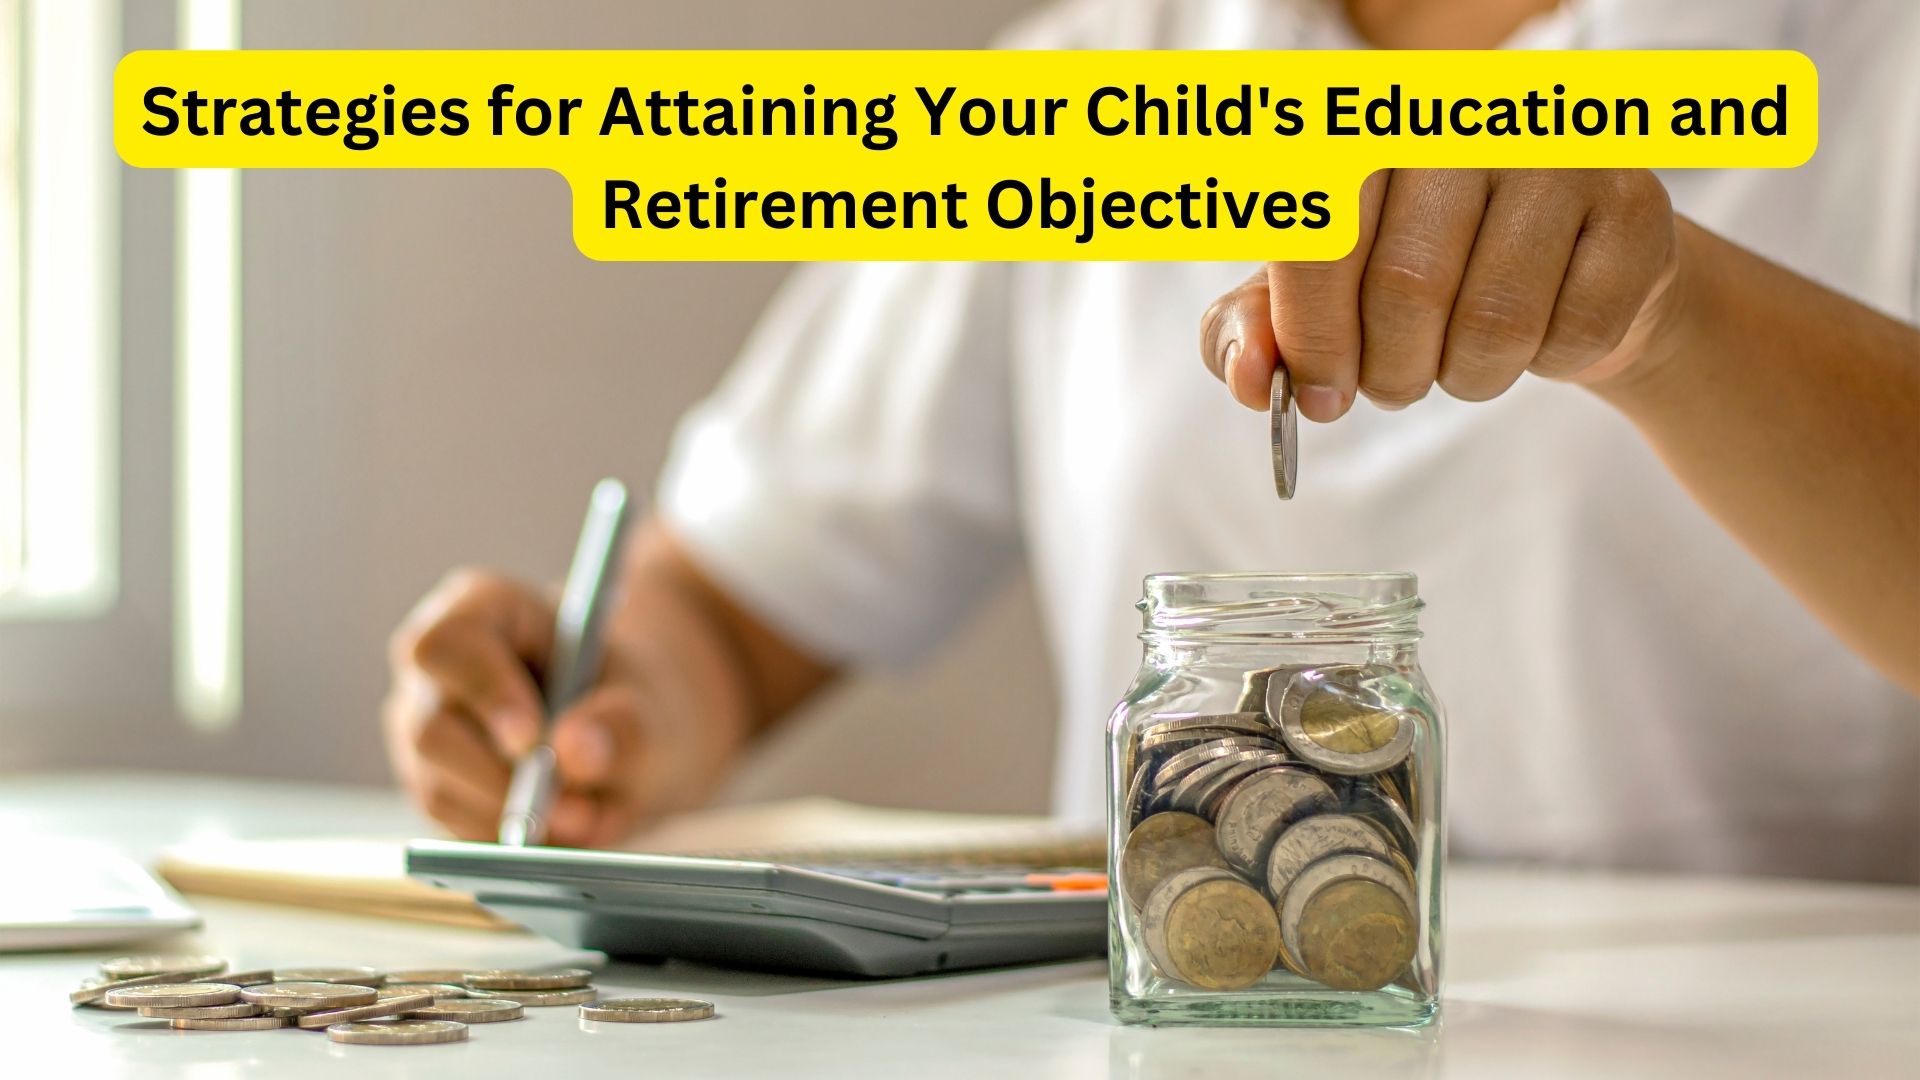 Strategies for Attaining Your Child's Education and Retirement Objectives